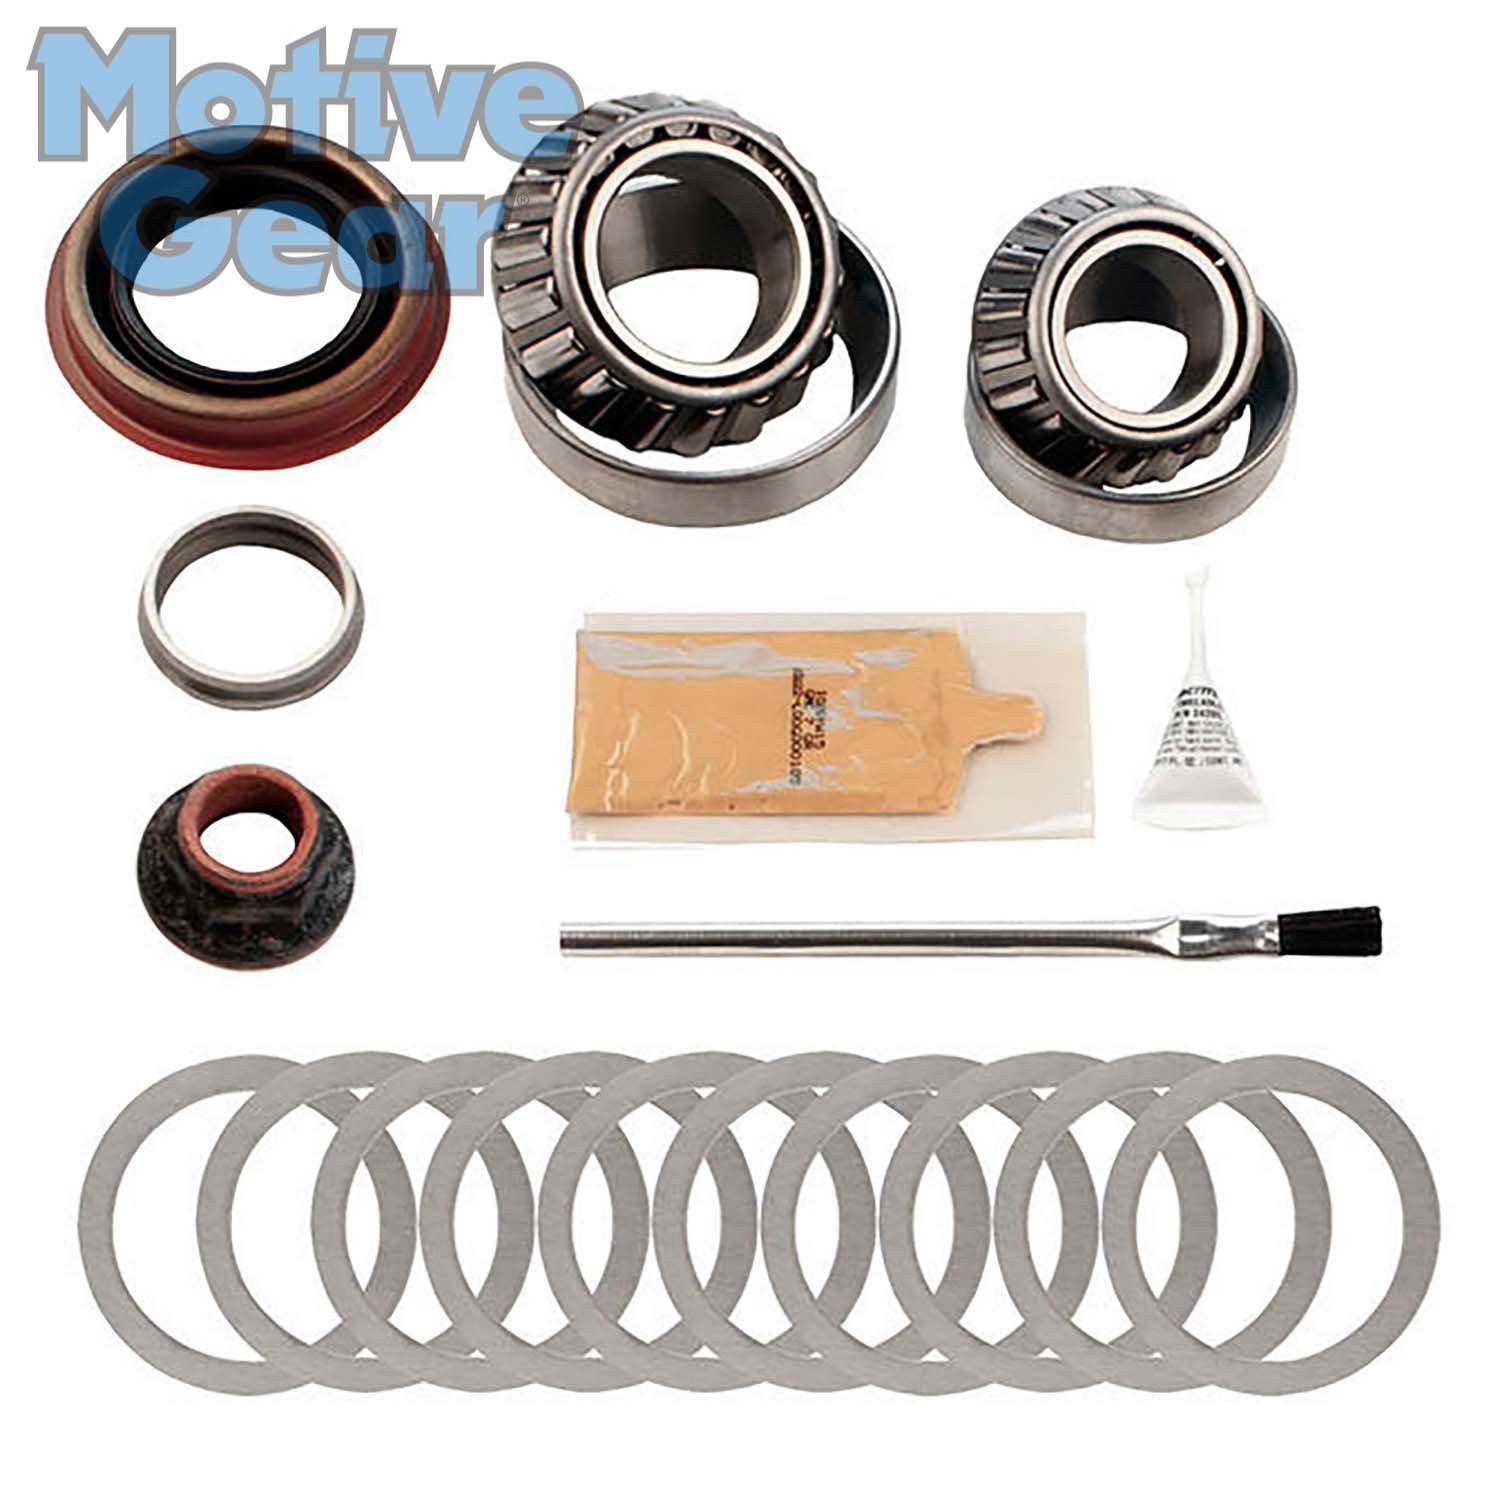 Differential Pinion Bearing Kit Ford 8.8 in. 10-bolt - Timkin Bearings